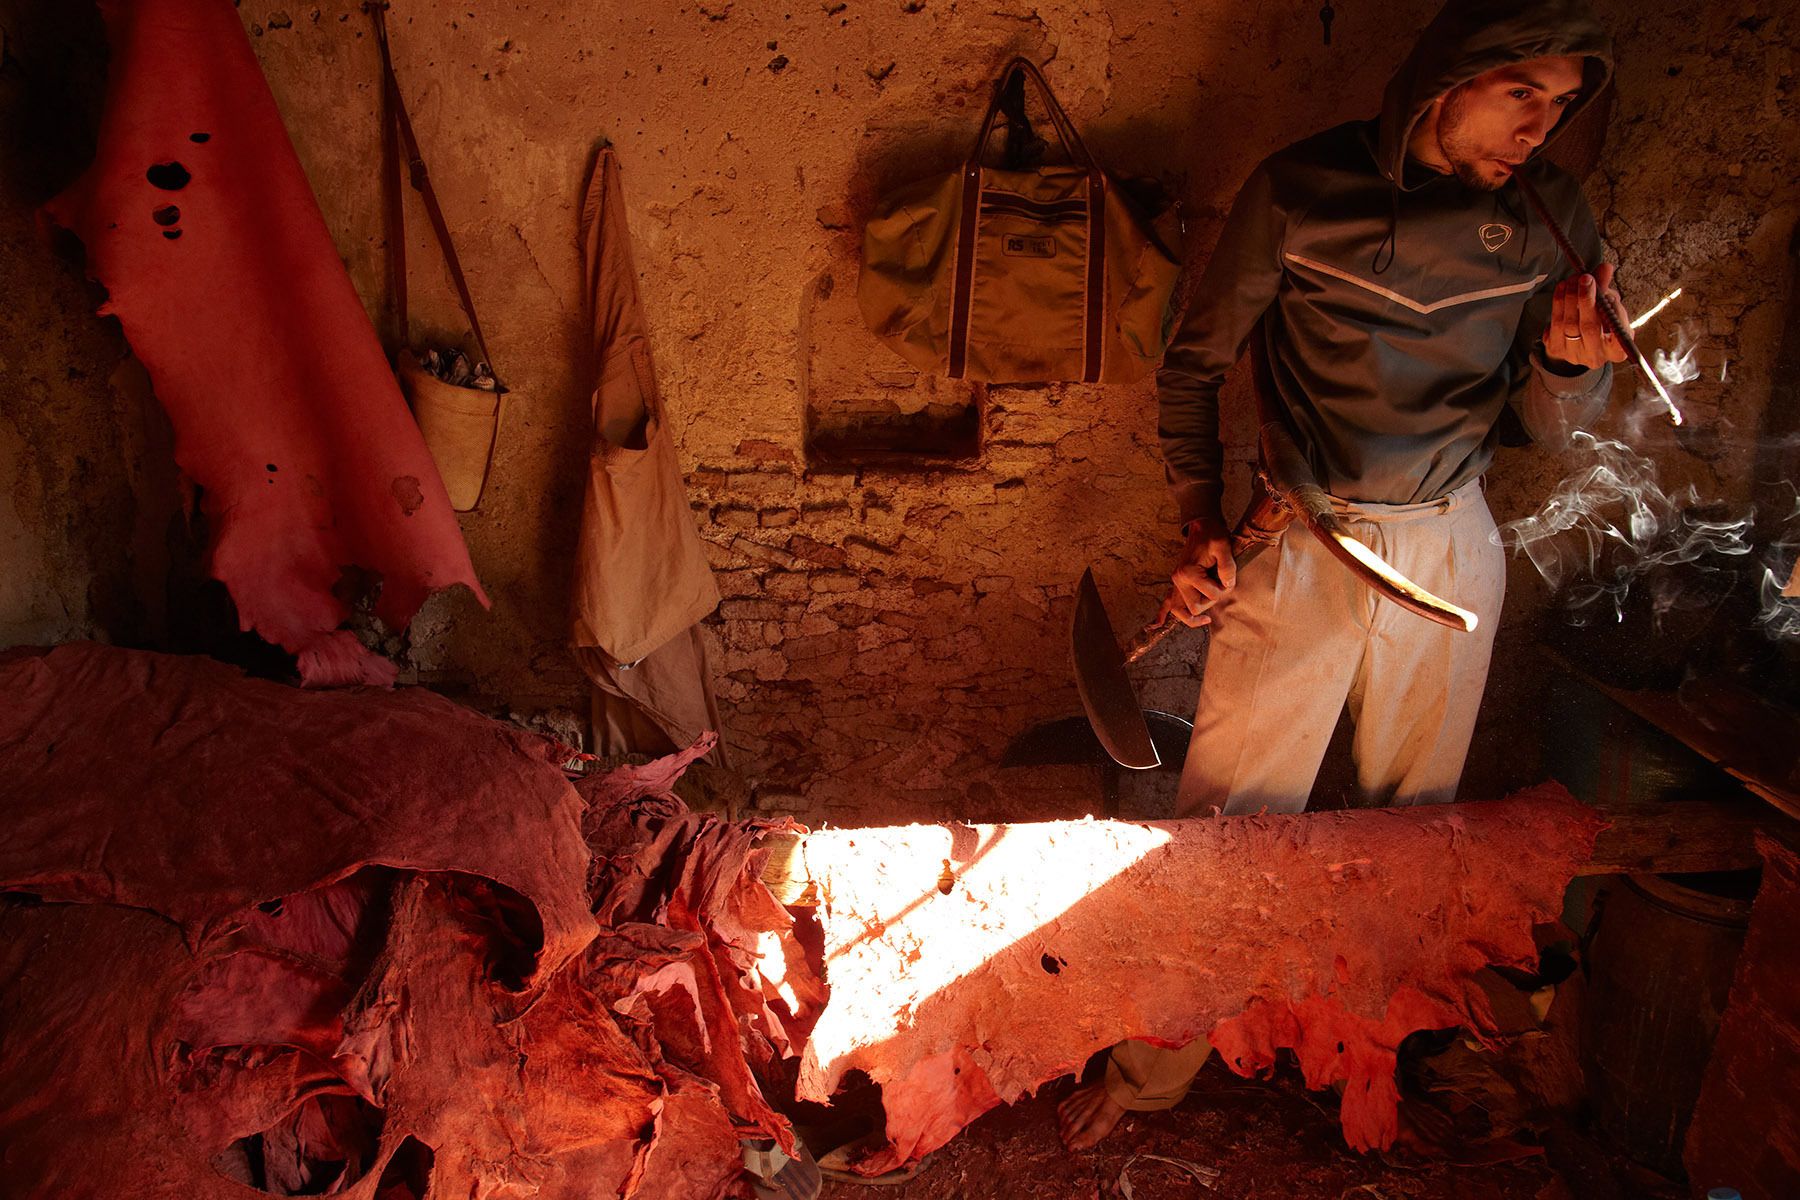 A worker at a tannery in Fez, Morocco